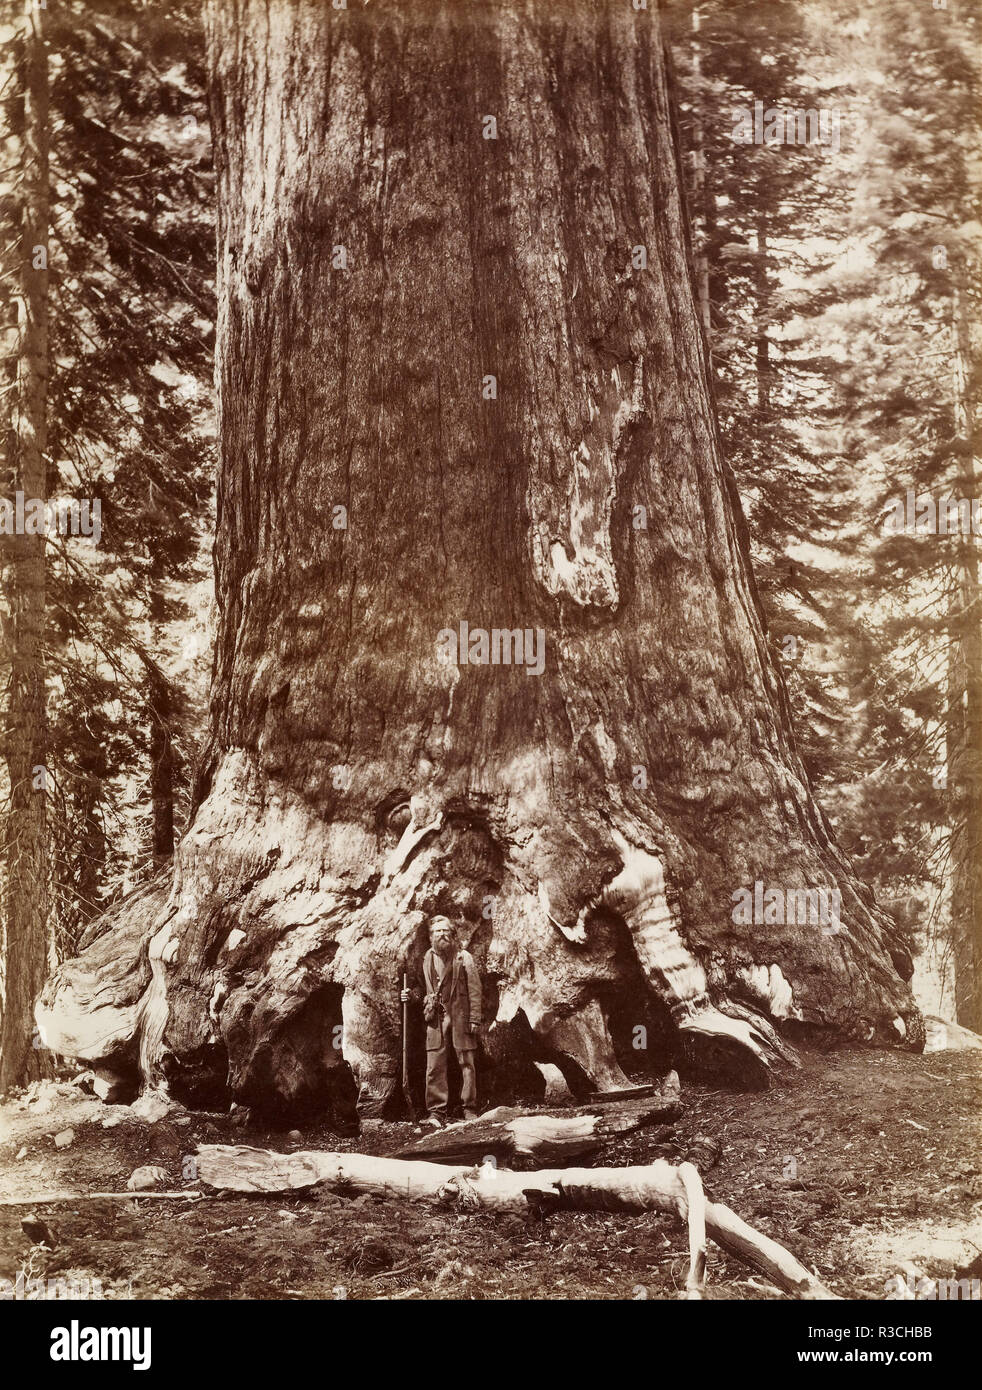 [Grizzly Giant Diameter 33 Ft. Mariposa Grove]. Date/Period: Negative 1865 - 1866?; print 1880 - 1890. Print. Albumen silver. Height: 213 mm (8.38 in); Width: 162 mm (6.37 in). Author: Carleton Watkins. Stock Photo